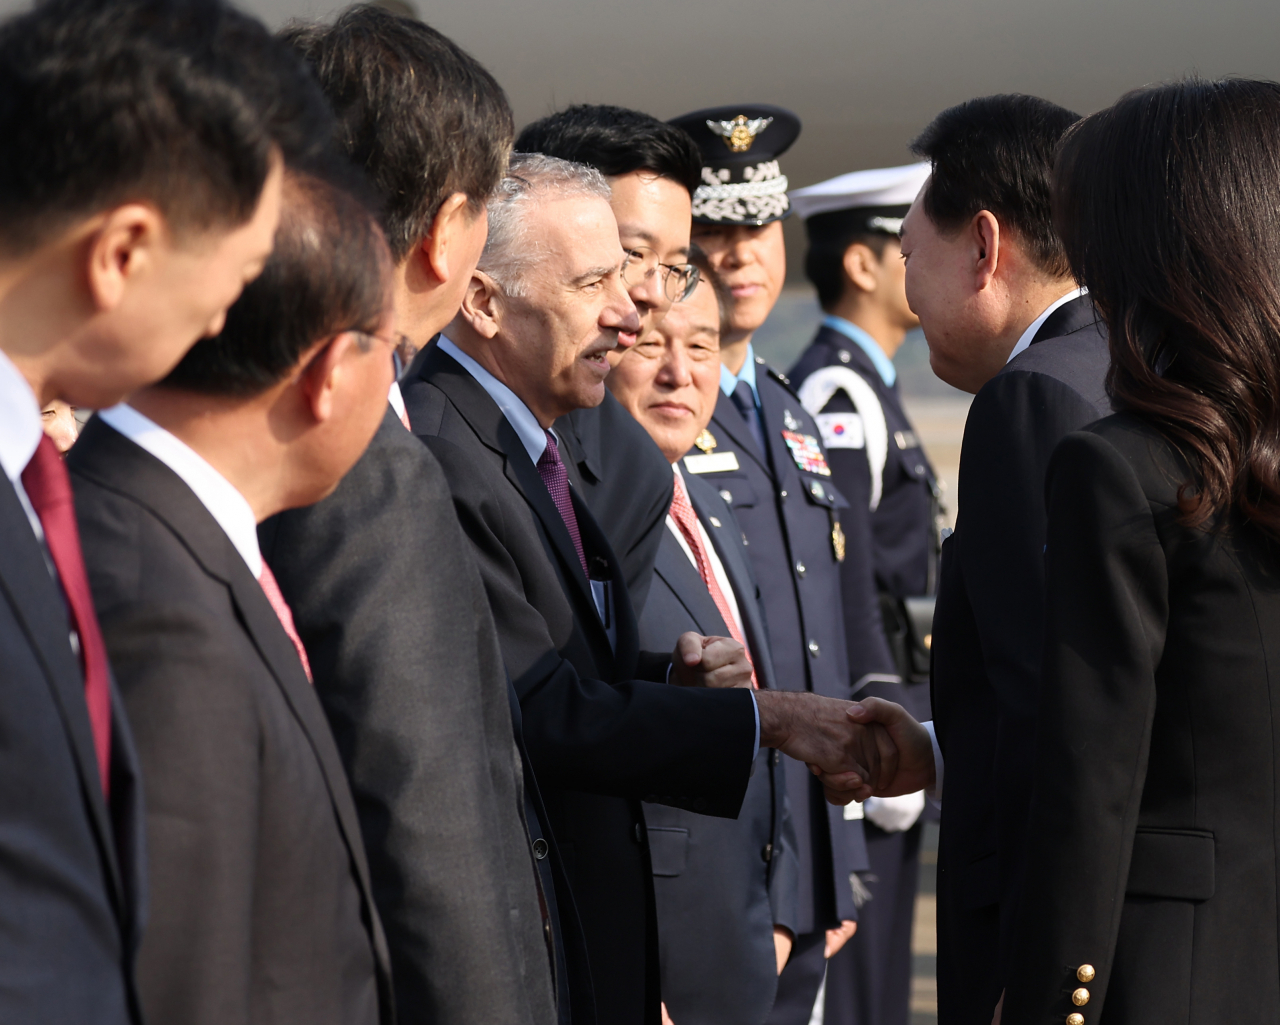 President Yoon Suk Yeol (second from right) shakes hands with US Ambassador to South Korea Philip Goldberg at Seoul Air Base in Seongnam, Gyeonggi Province, before departing for San Francisco on Wednesday to attend the Asia-Pacific Economic Cooperation summit. (Yonhap)